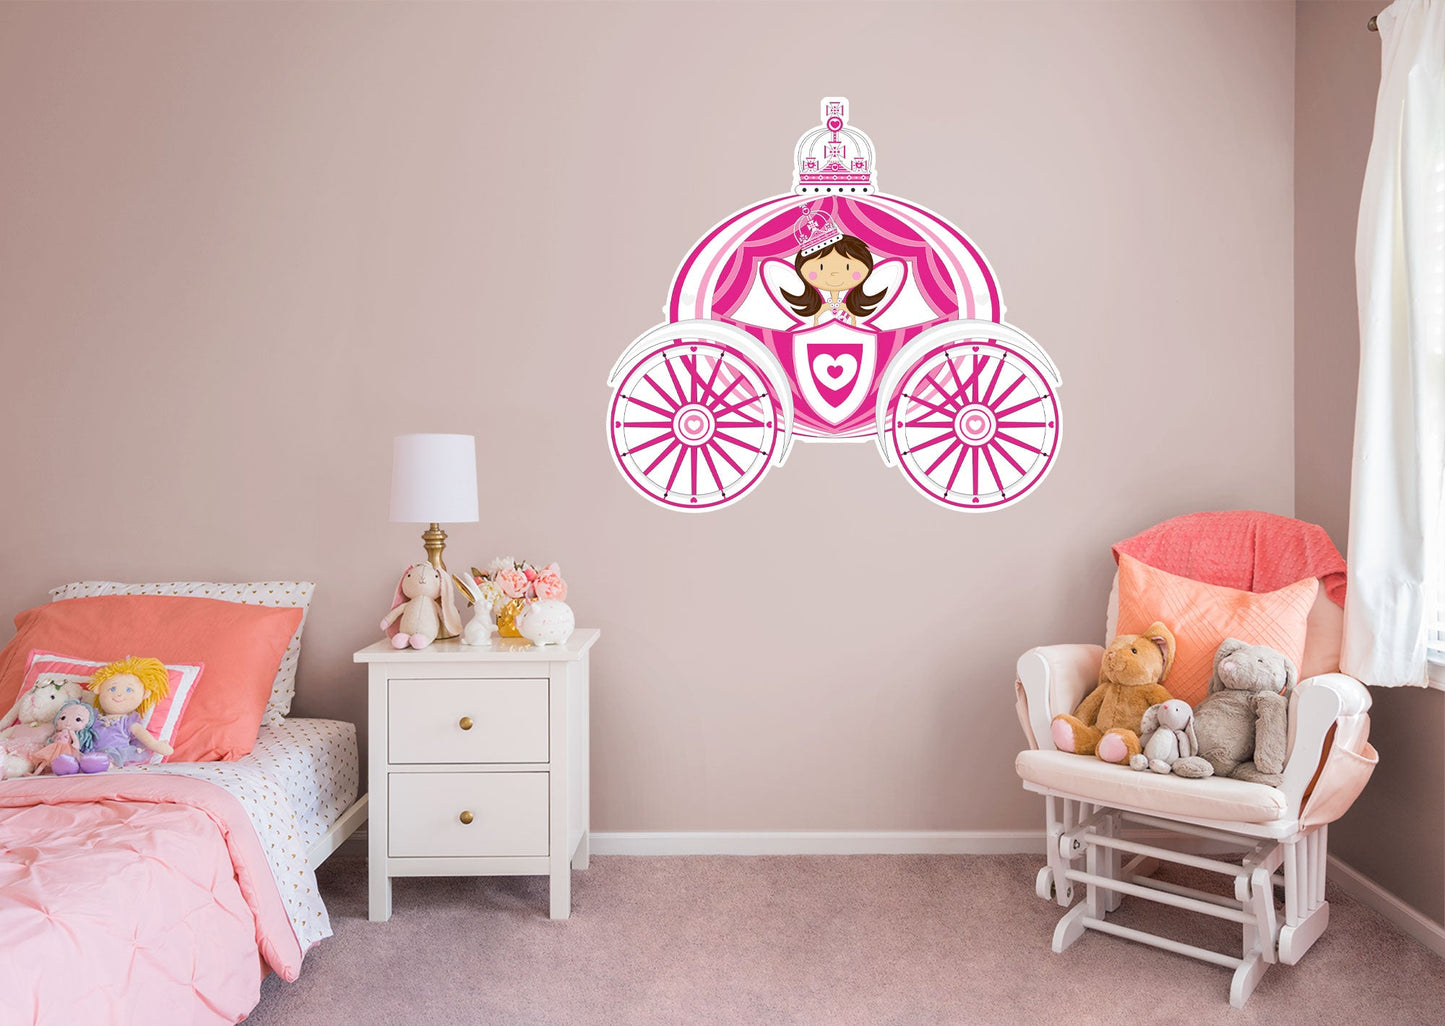 Nursery:  Fancy Carriage Icon        -   Removable     Adhesive Decal